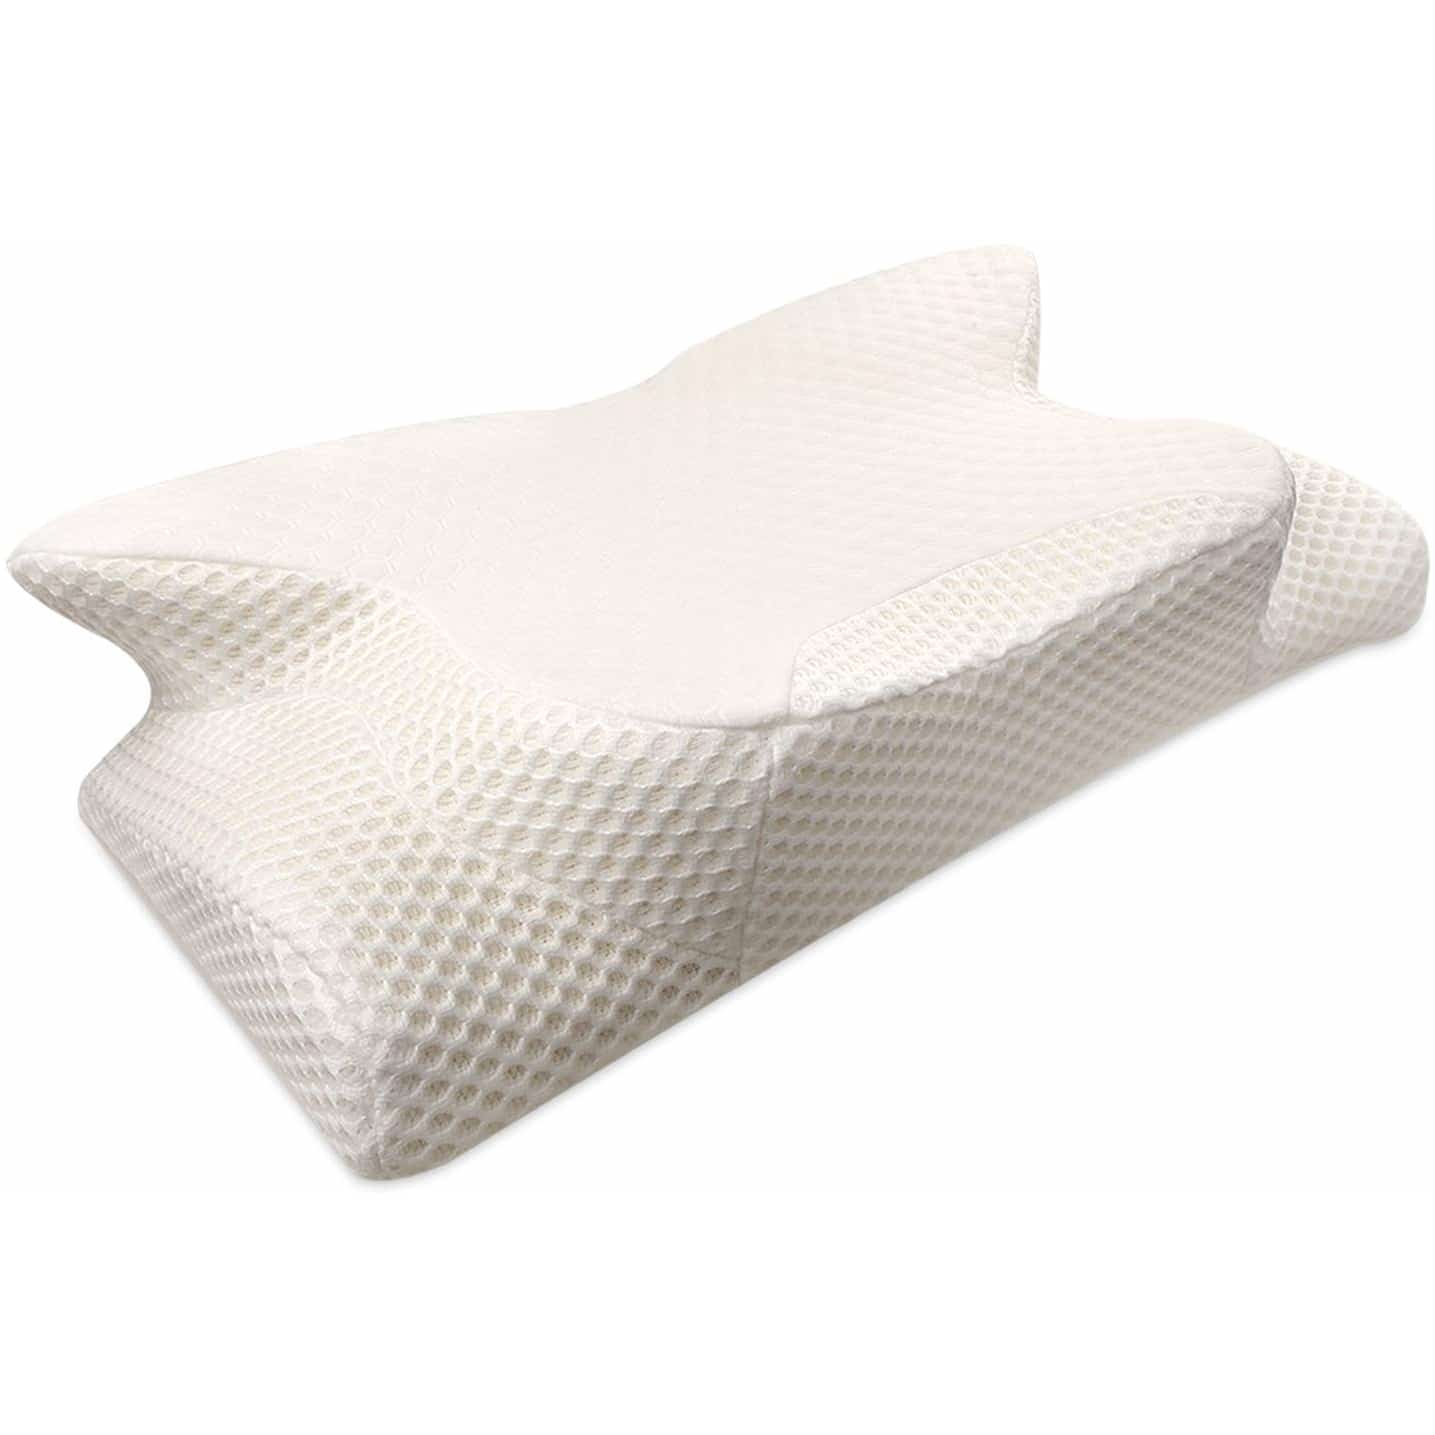 Maxchange Cervical Pillow for Back and Side Sleepers